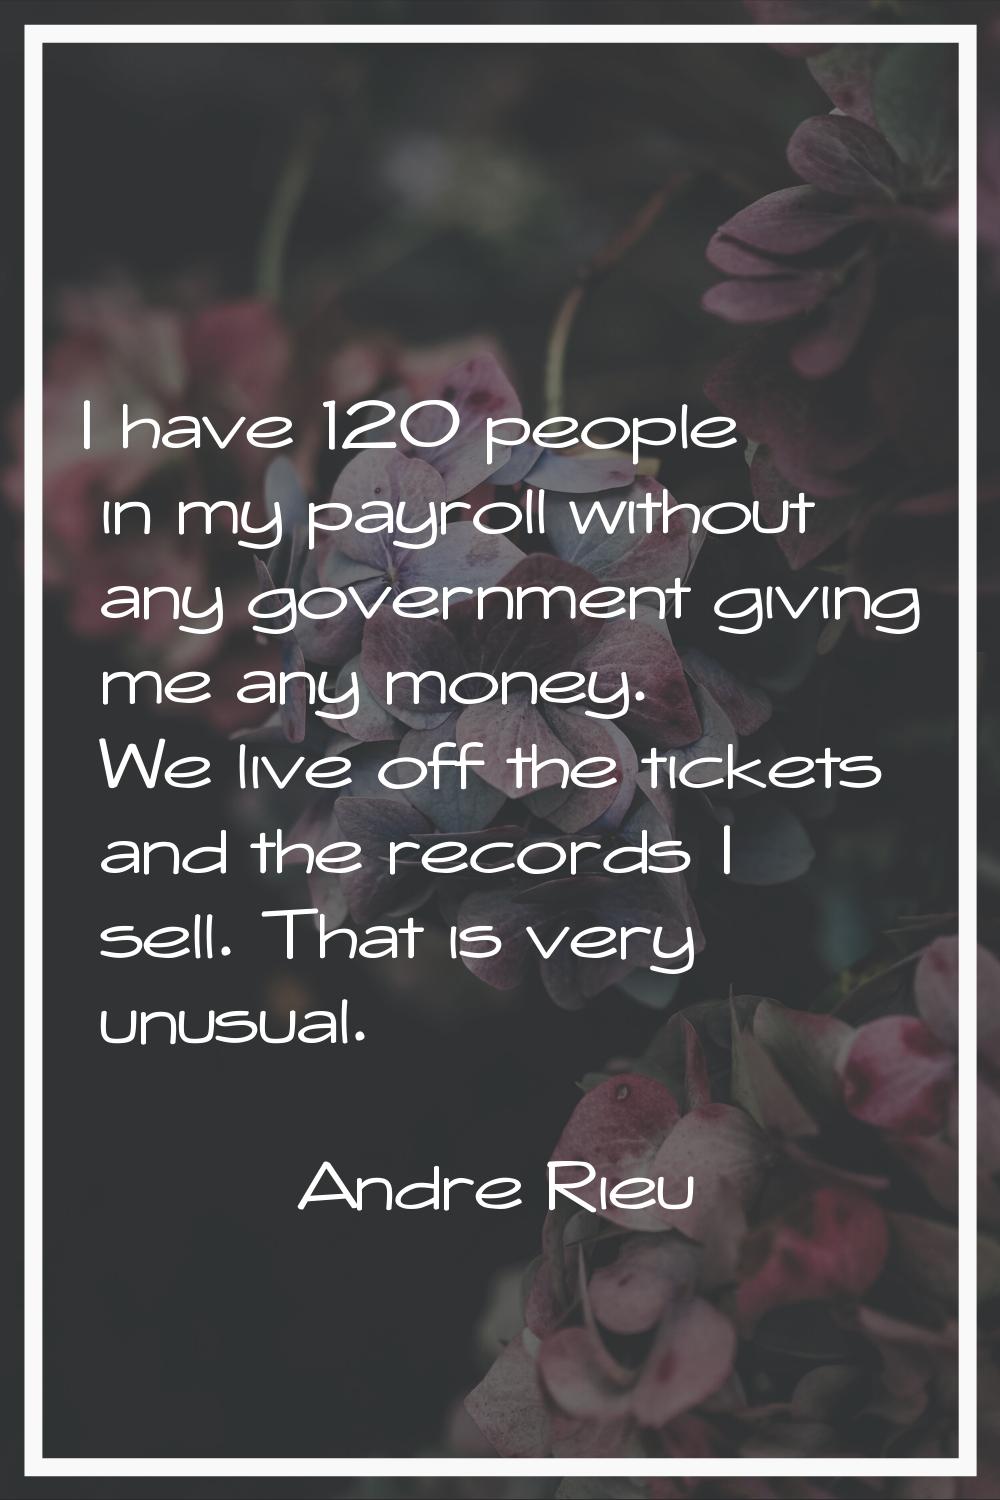 I have 120 people in my payroll without any government giving me any money. We live off the tickets